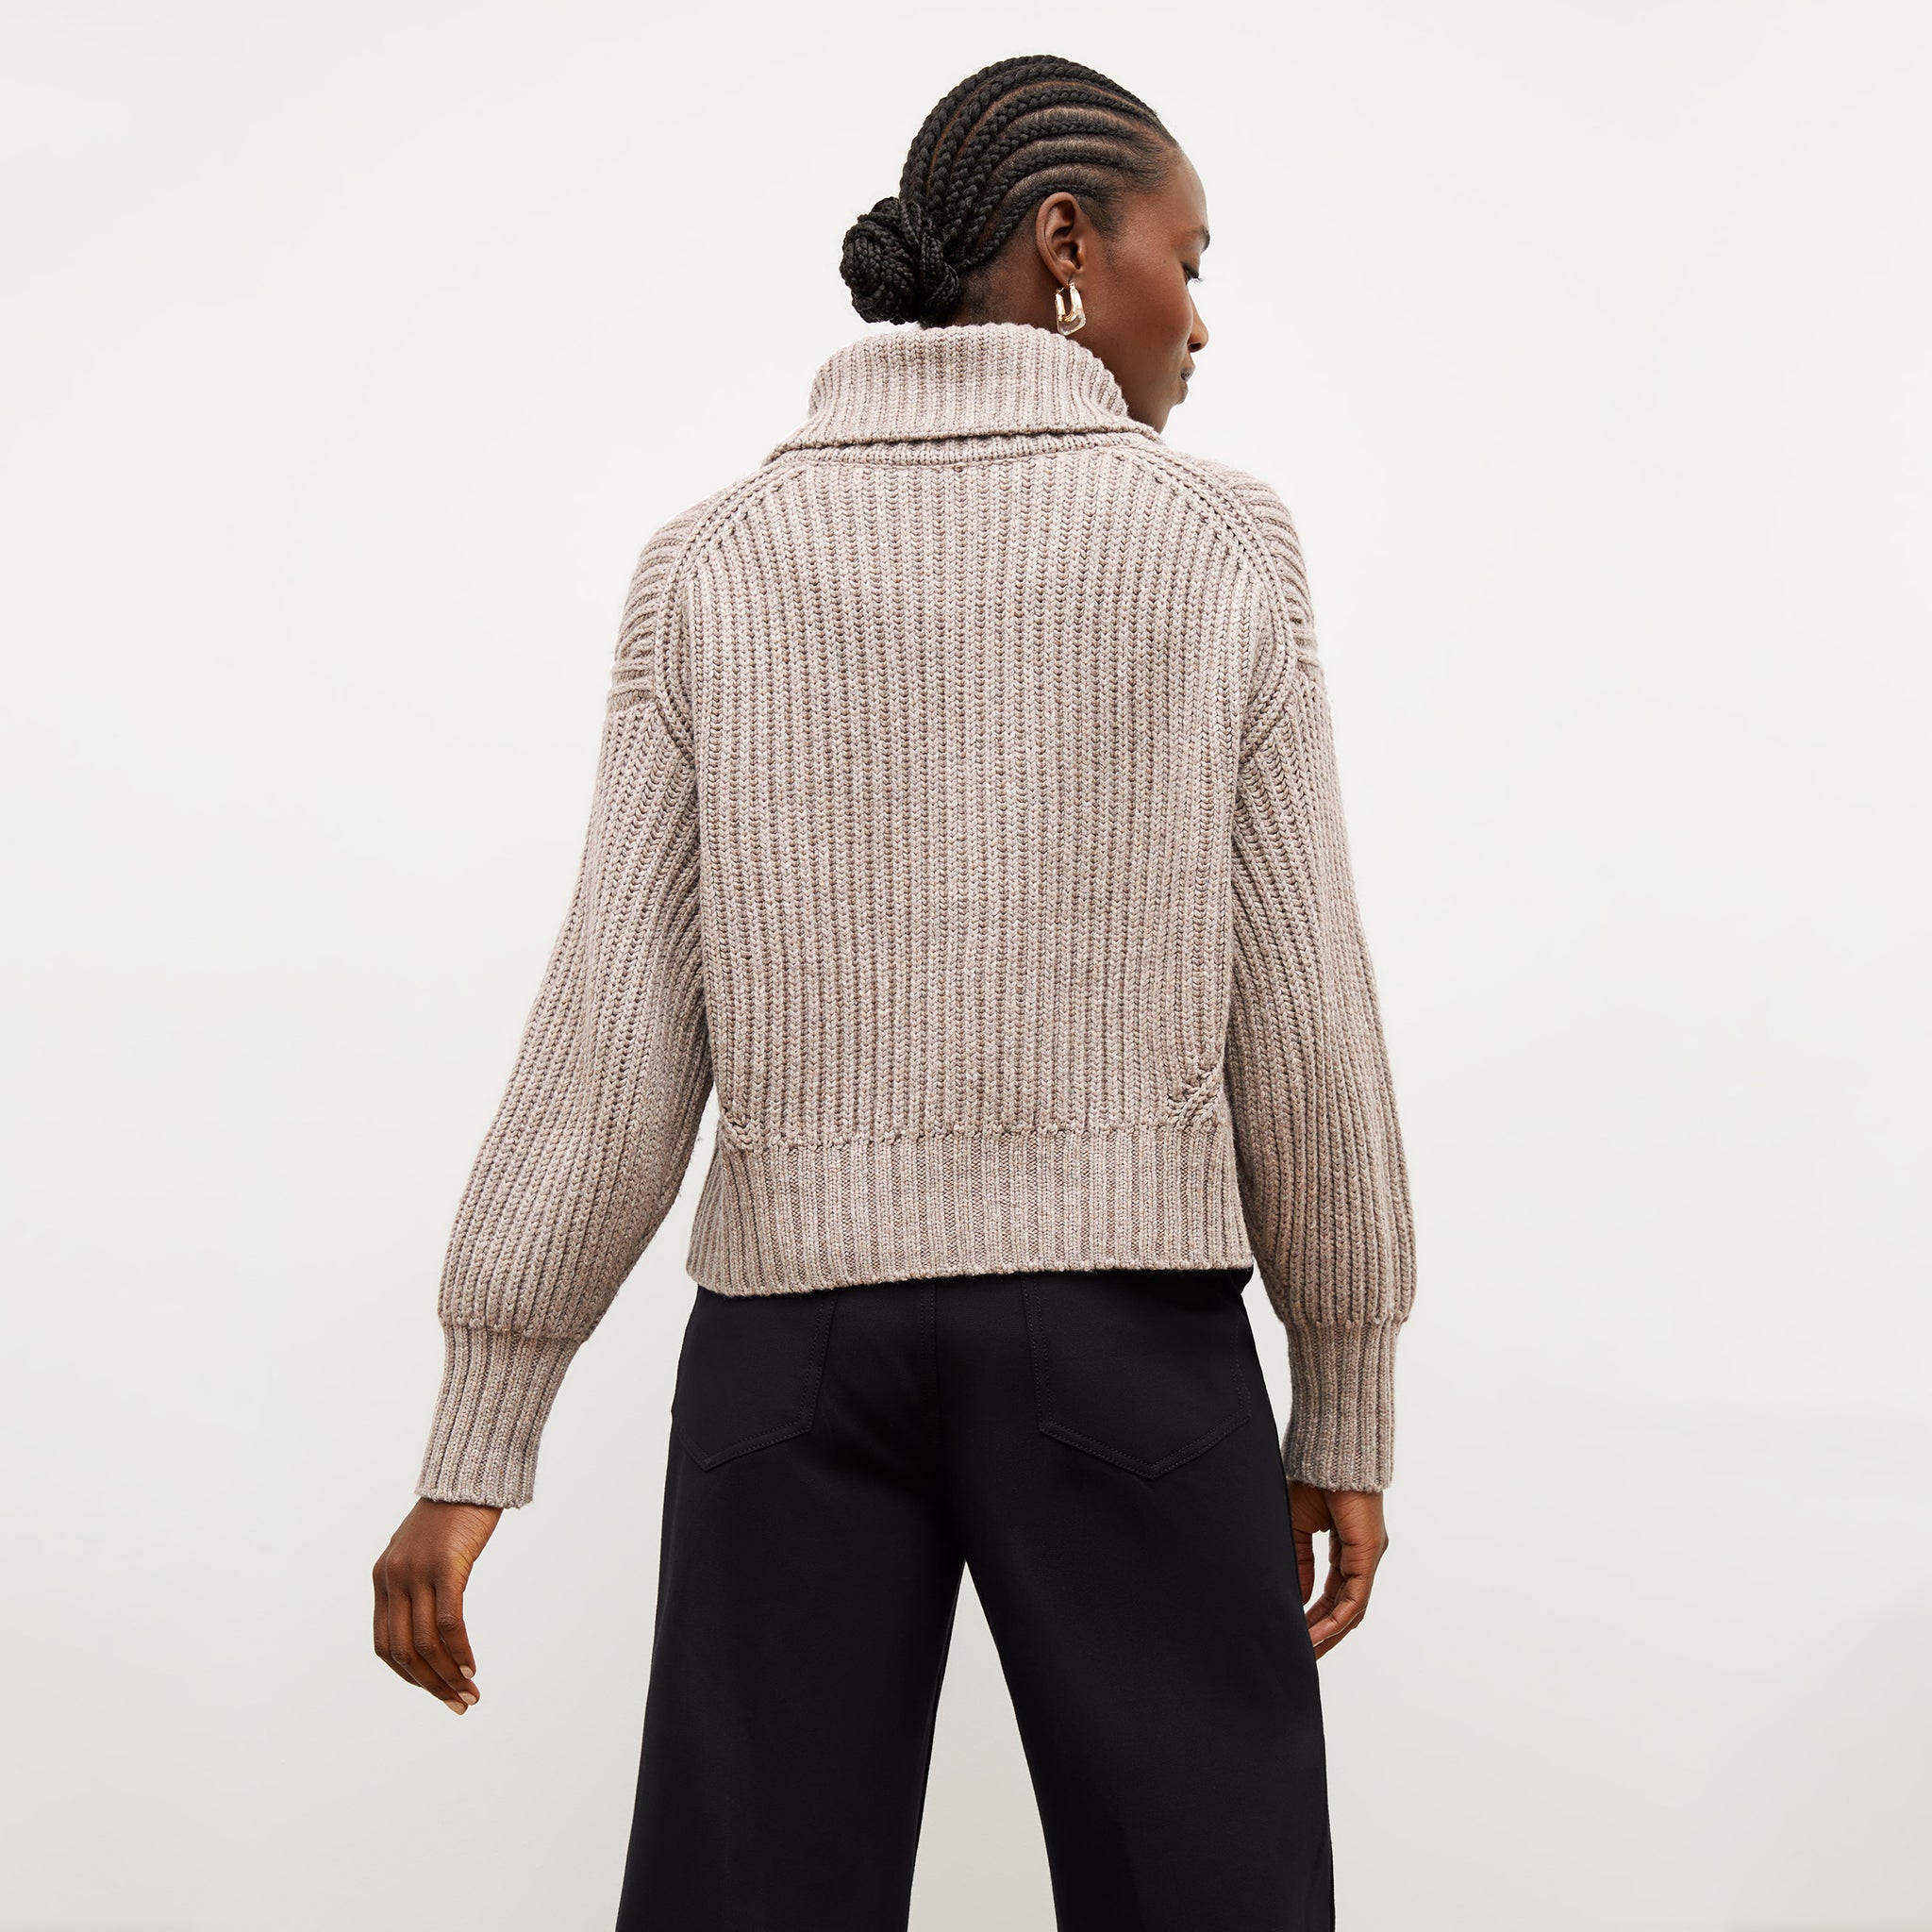 Back image of a woman wearing the william sweater in barley